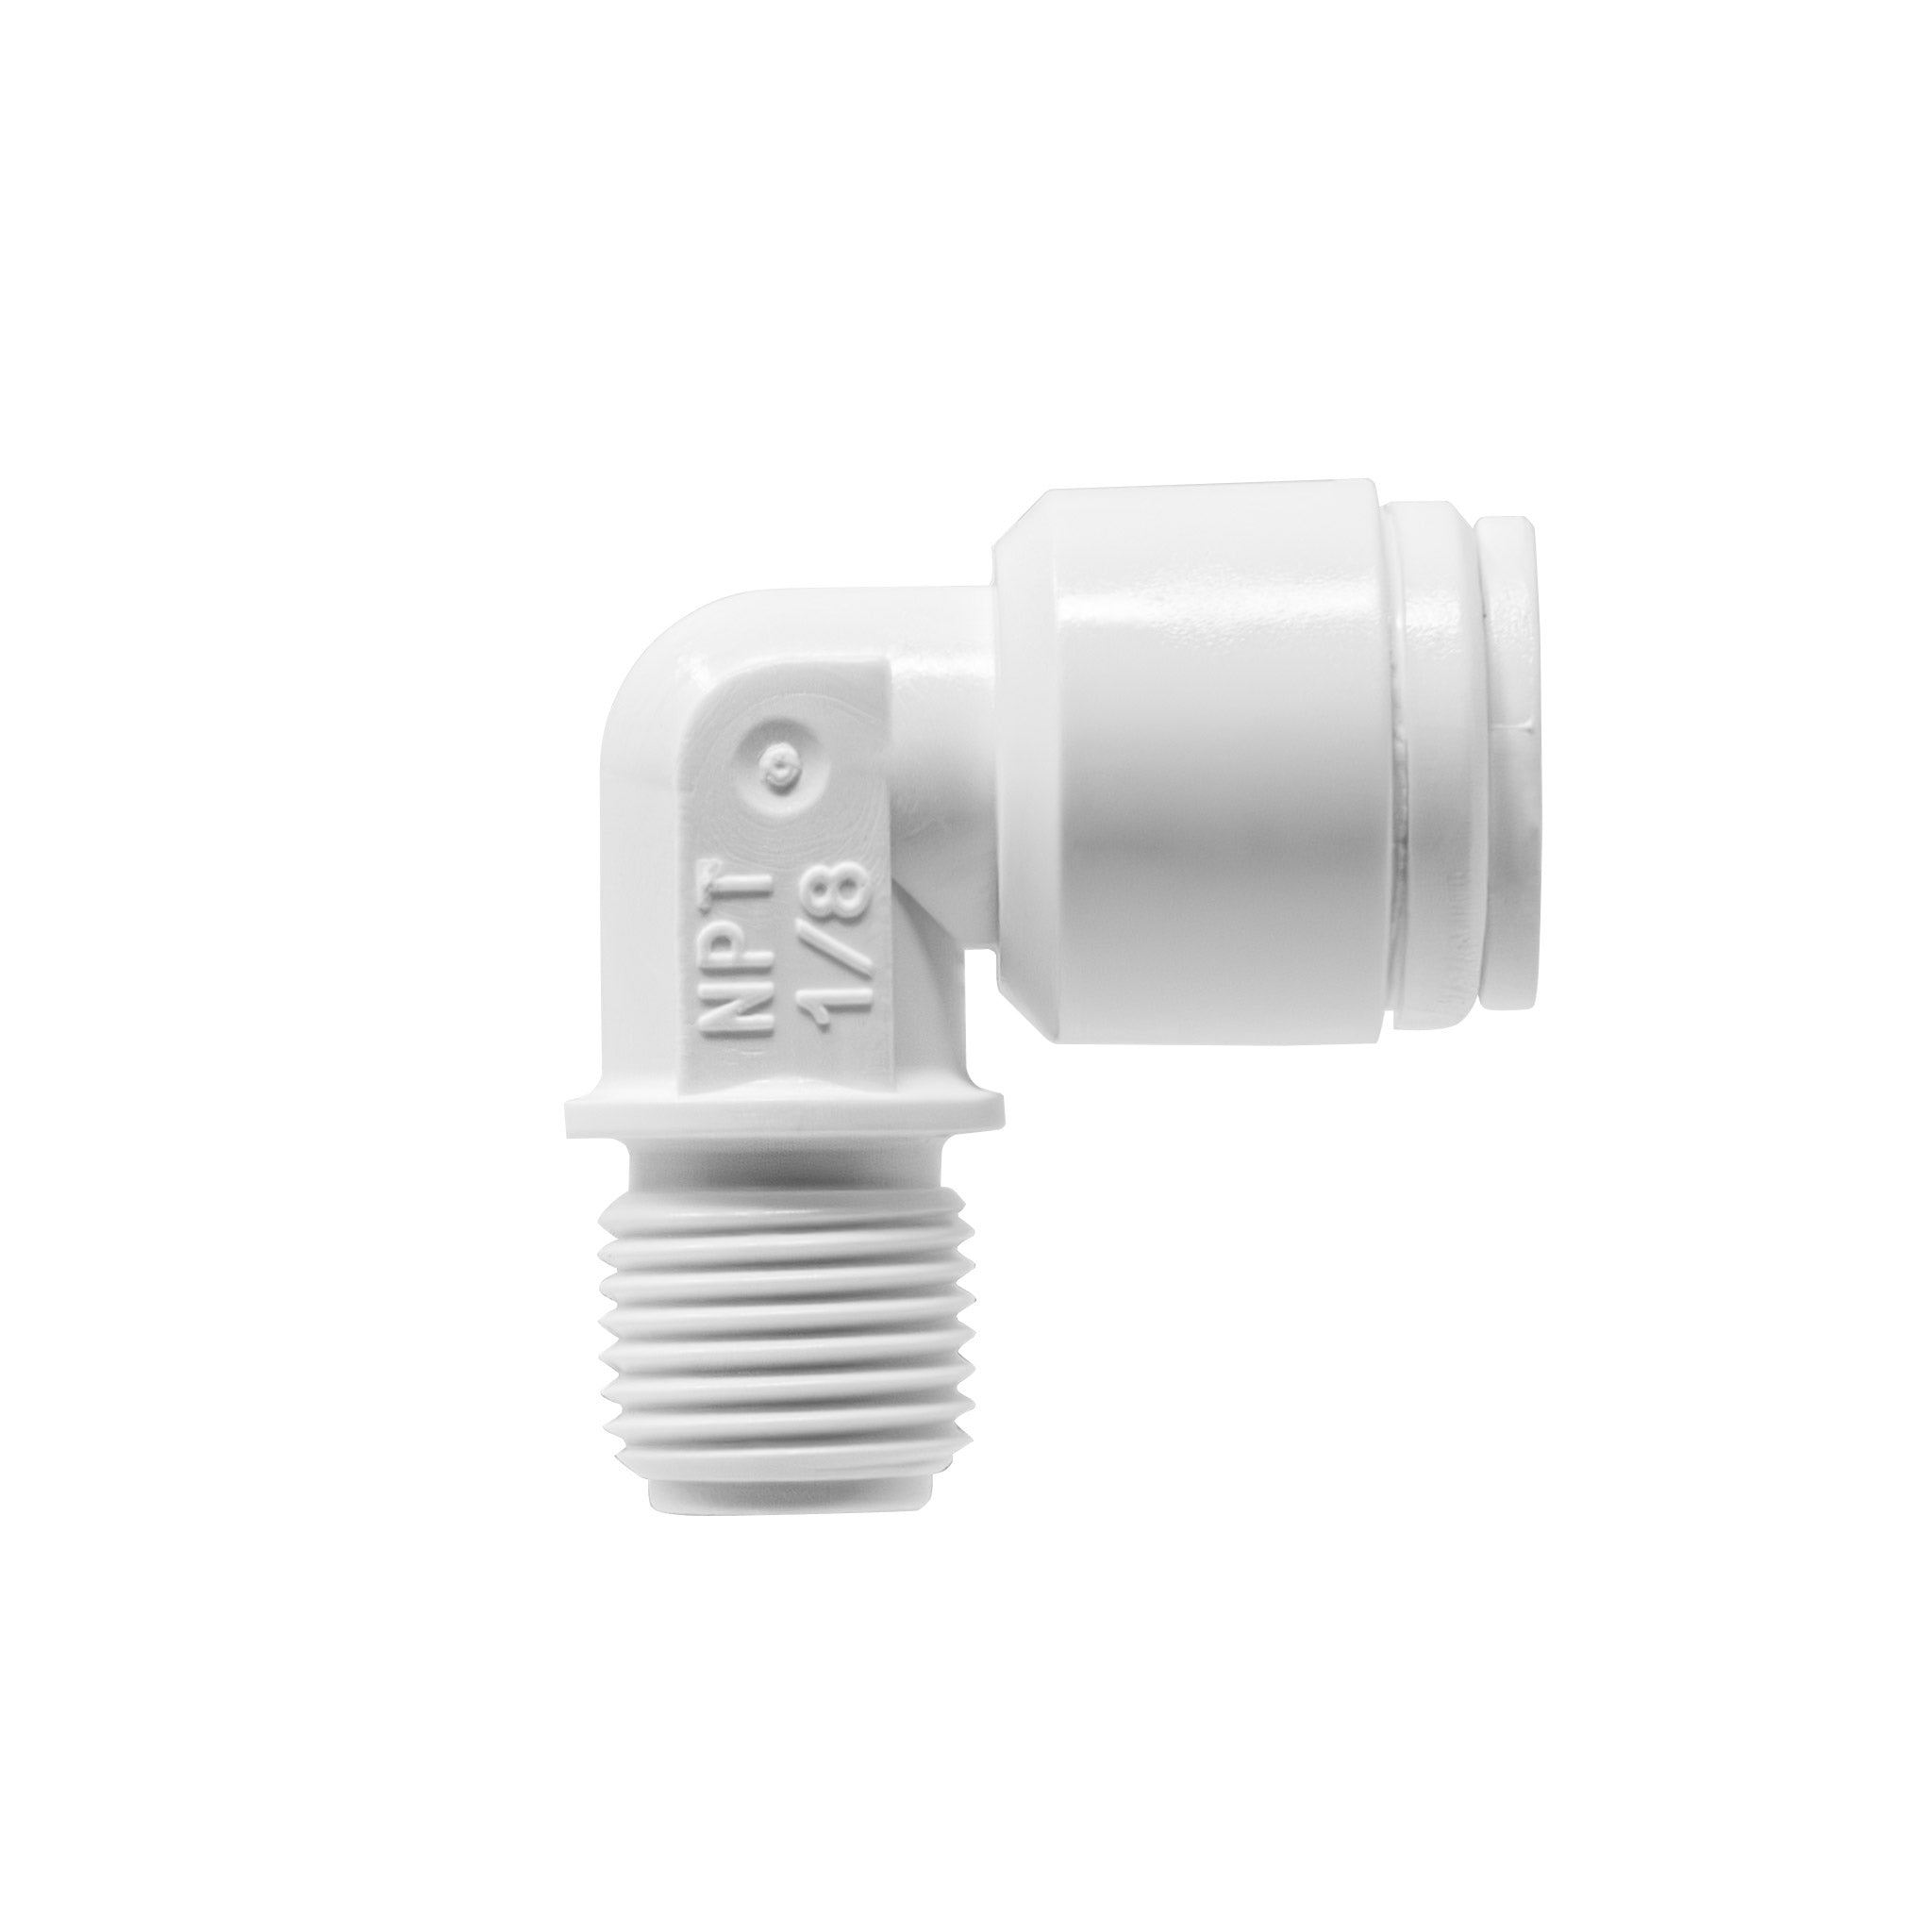 Quick connect male elbow with check valve. 1/4" quick connect x 1/8" male thread. Certified by NSF.